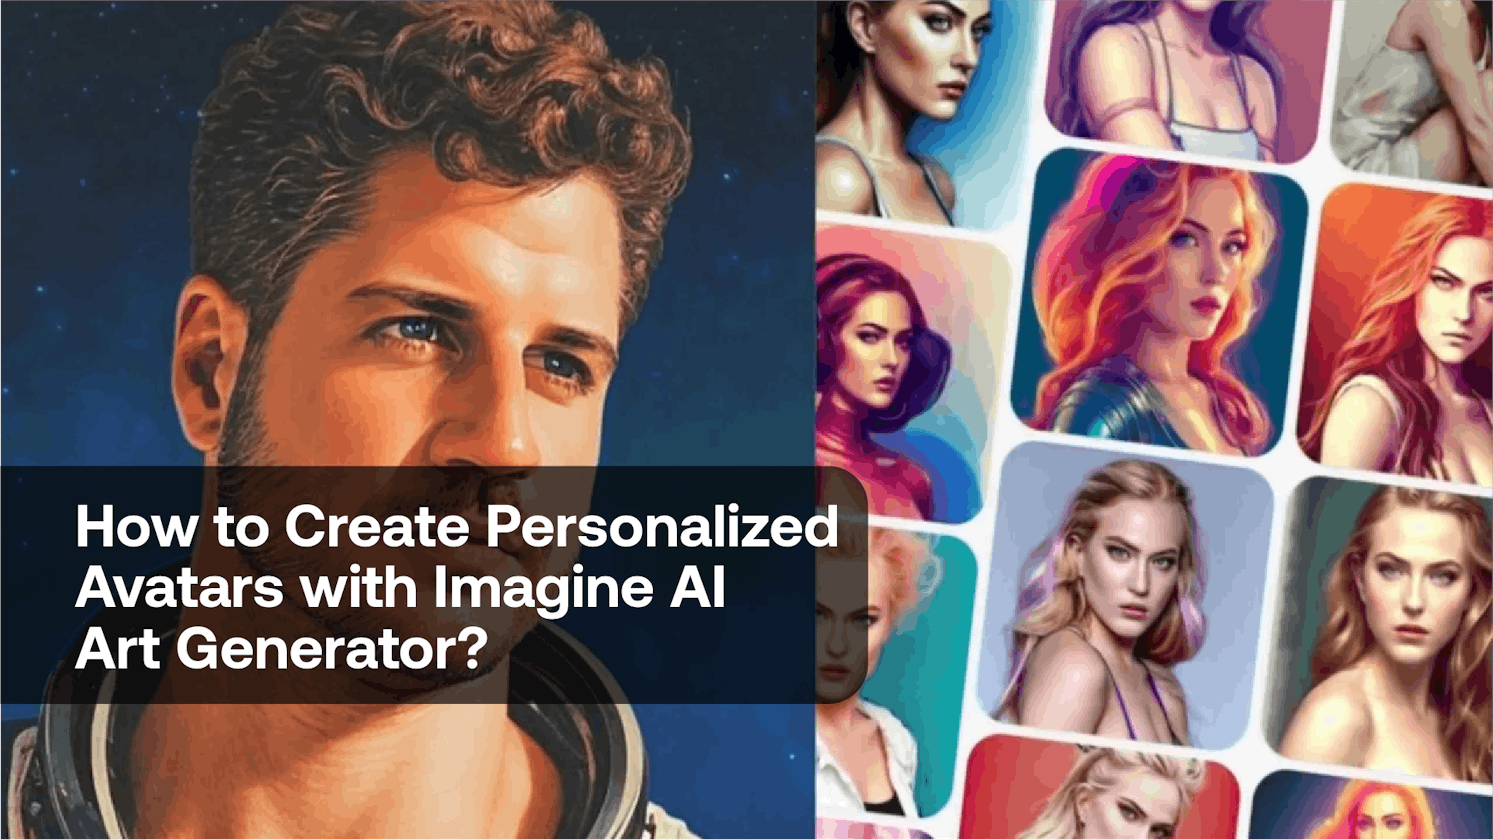 How to Create Personalized Avatars with Imagine AI Art Generator?